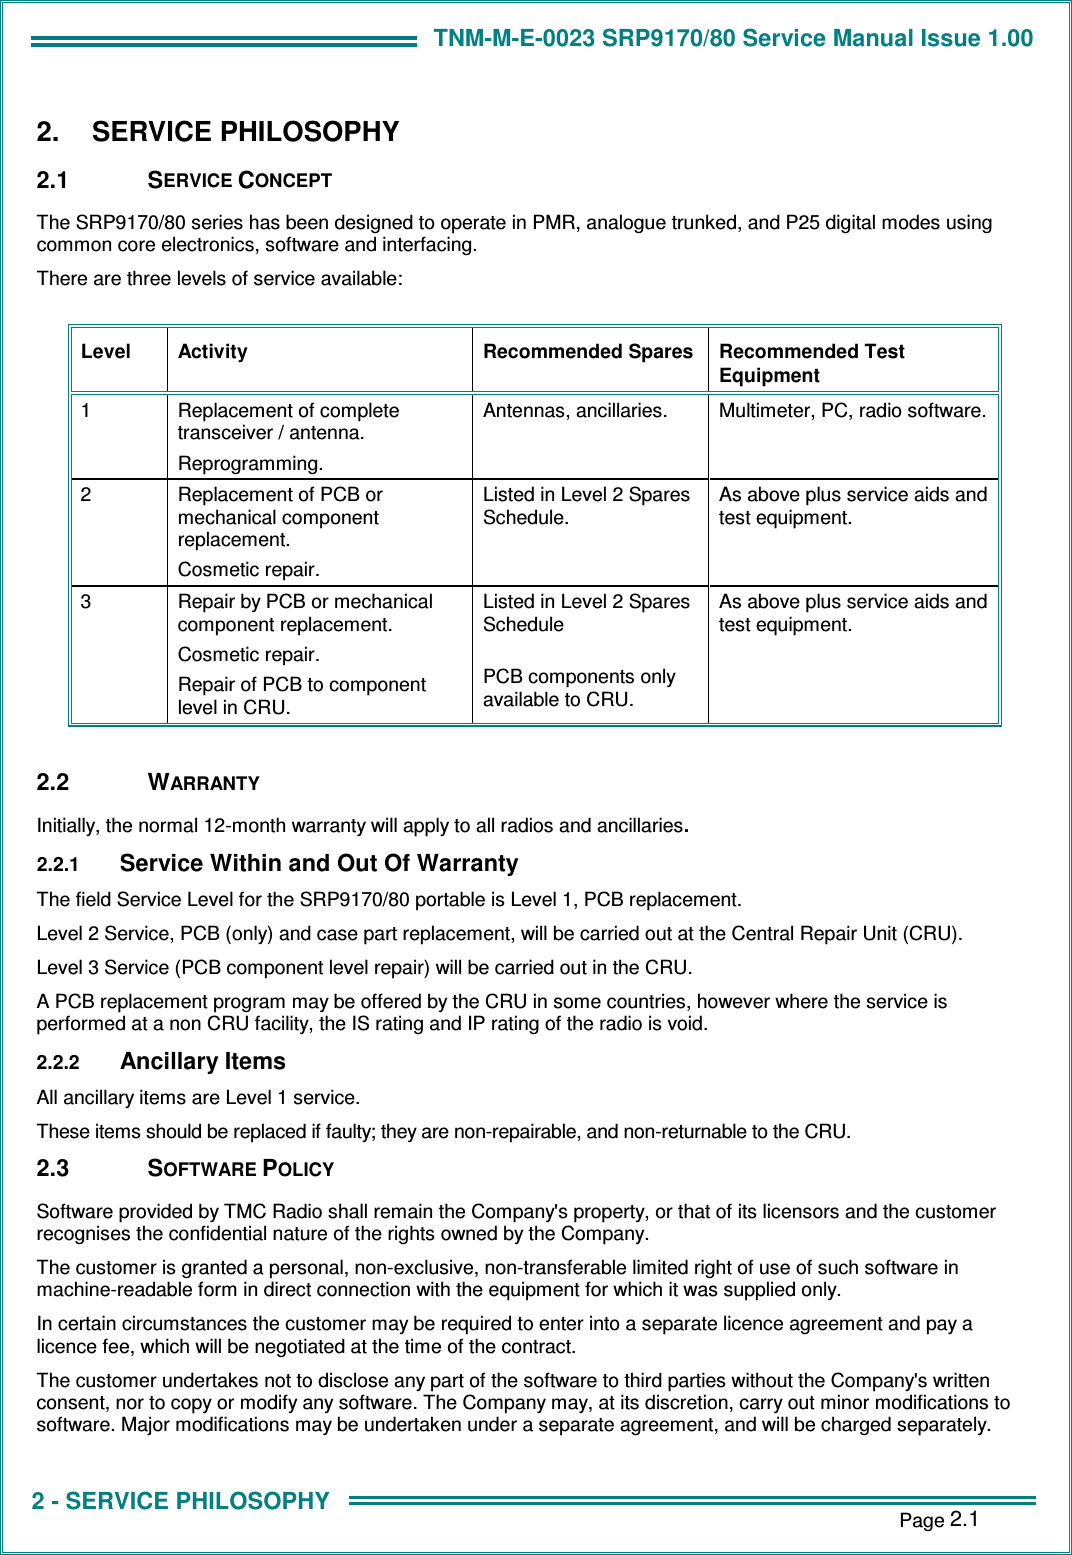 TNM-M-E-0023 SRP9170/80 Service Manual Issue 1.00 1 - INTRODUCTION    Page 2.1 2 - SERVICE PHILOSOPHY 2.  SERVICE PHILOSOPHY 2.1  SERVICE CONCEPT The SRP9170/80 series has been designed to operate in PMR, analogue trunked, and P25 digital modes using common core electronics, software and interfacing. There are three levels of service available:  Level  Activity  Recommended Spares  Recommended Test Equipment 1  Replacement of complete transceiver / antenna. Reprogramming. Antennas, ancillaries.  Multimeter, PC, radio software. 2  Replacement of PCB or mechanical component replacement. Cosmetic repair. Listed in Level 2 Spares Schedule. As above plus service aids and test equipment. 3  Repair by PCB or mechanical component replacement. Cosmetic repair. Repair of PCB to component level in CRU. Listed in Level 2 Spares Schedule  PCB components only available to CRU. As above plus service aids and test equipment.  2.2  WARRANTY Initially, the normal 12-month warranty will apply to all radios and ancillaries. 2.2.1 Service Within and Out Of Warranty The field Service Level for the SRP9170/80 portable is Level 1, PCB replacement. Level 2 Service, PCB (only) and case part replacement, will be carried out at the Central Repair Unit (CRU). Level 3 Service (PCB component level repair) will be carried out in the CRU. A PCB replacement program may be offered by the CRU in some countries, however where the service is performed at a non CRU facility, the IS rating and IP rating of the radio is void. 2.2.2 Ancillary Items All ancillary items are Level 1 service. These items should be replaced if faulty; they are non-repairable, and non-returnable to the CRU. 2.3  SOFTWARE POLICY Software provided by TMC Radio shall remain the Company&apos;s property, or that of its licensors and the customer recognises the confidential nature of the rights owned by the Company. The customer is granted a personal, non-exclusive, non-transferable limited right of use of such software in machine-readable form in direct connection with the equipment for which it was supplied only. In certain circumstances the customer may be required to enter into a separate licence agreement and pay a licence fee, which will be negotiated at the time of the contract. The customer undertakes not to disclose any part of the software to third parties without the Company&apos;s written consent, nor to copy or modify any software. The Company may, at its discretion, carry out minor modifications to software. Major modifications may be undertaken under a separate agreement, and will be charged separately. 